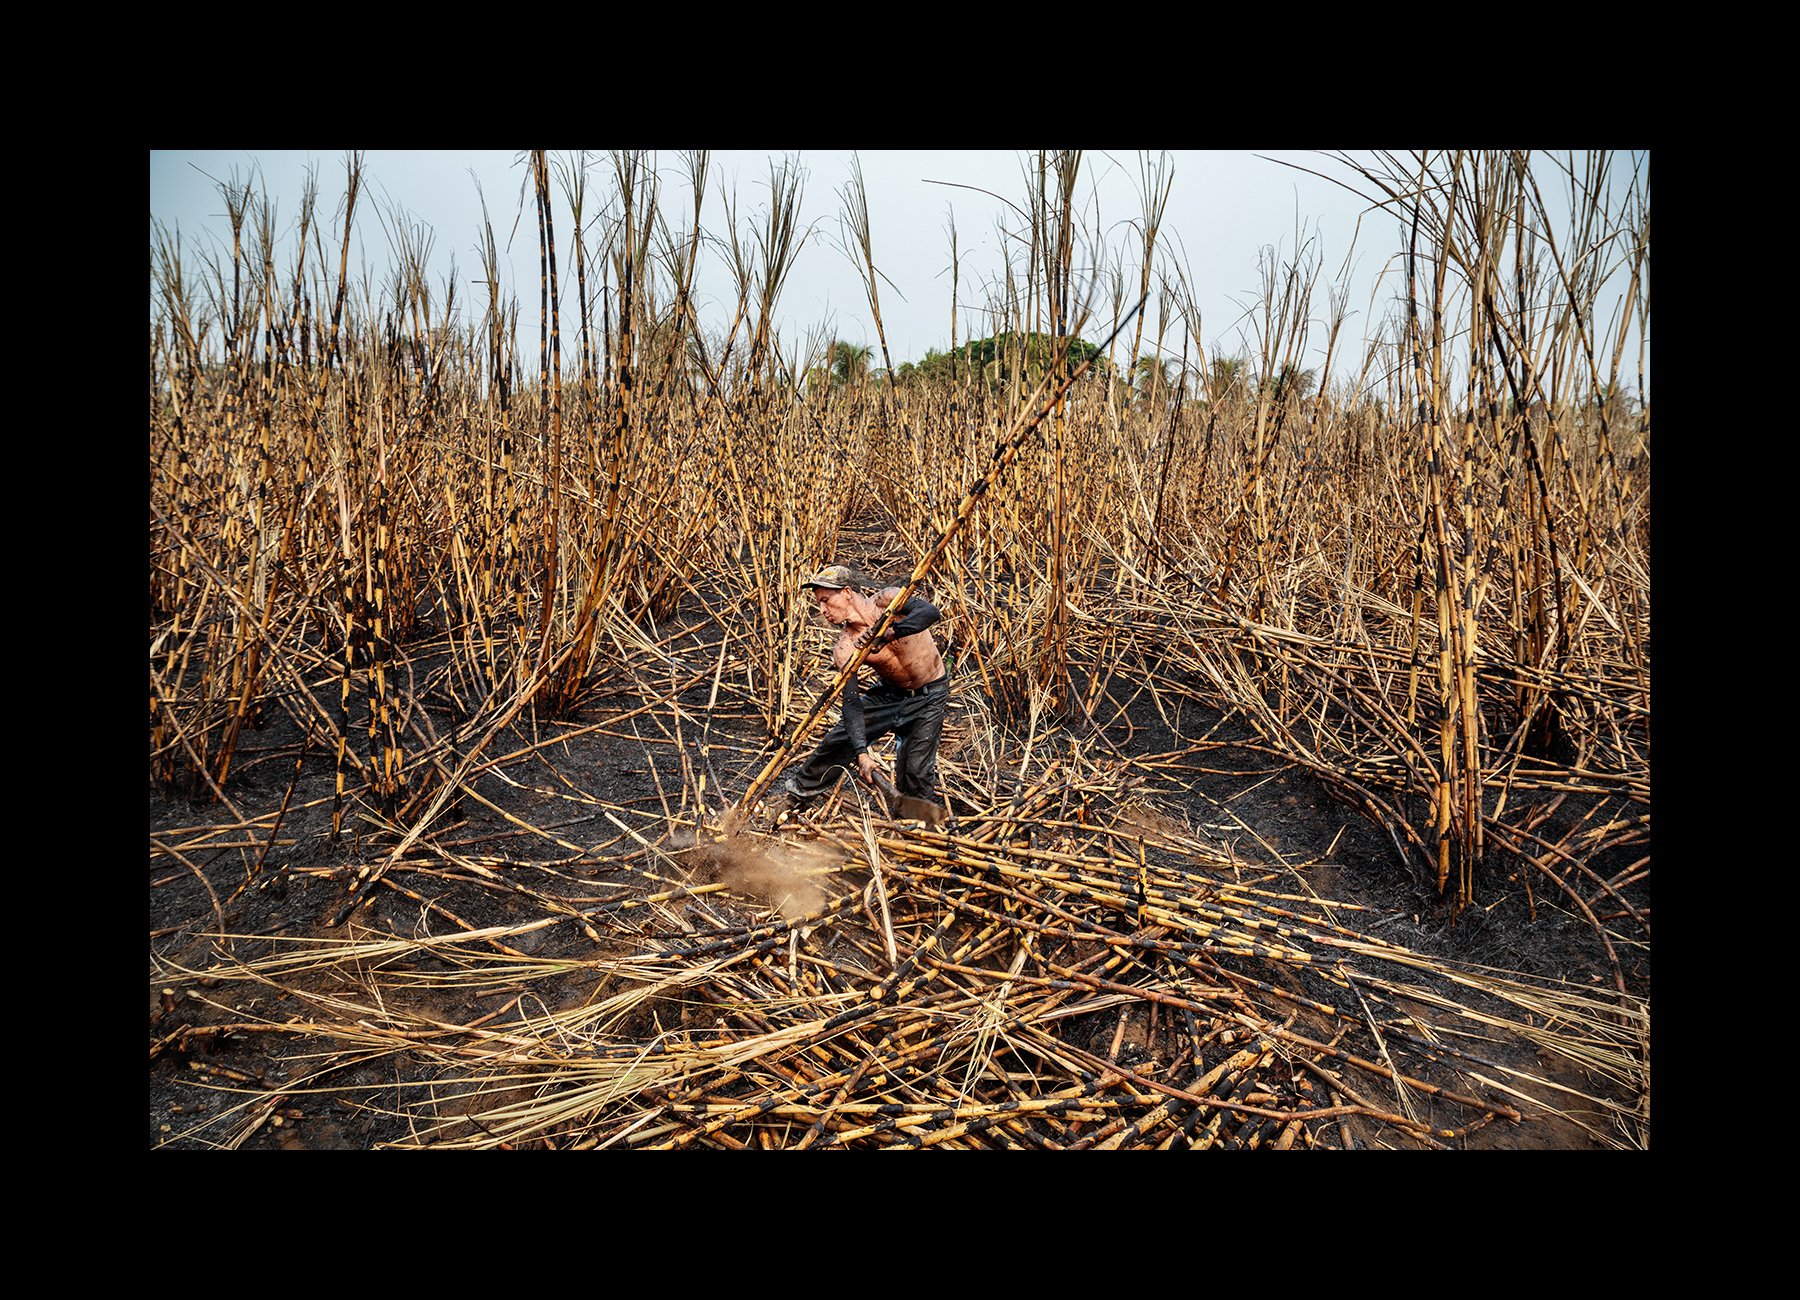  A cane cutter, covered in soot and ashes of charred sugar cane, in a field that was burned the night before, in Chichigalpa, Nicaragua on May 1, 2014. 